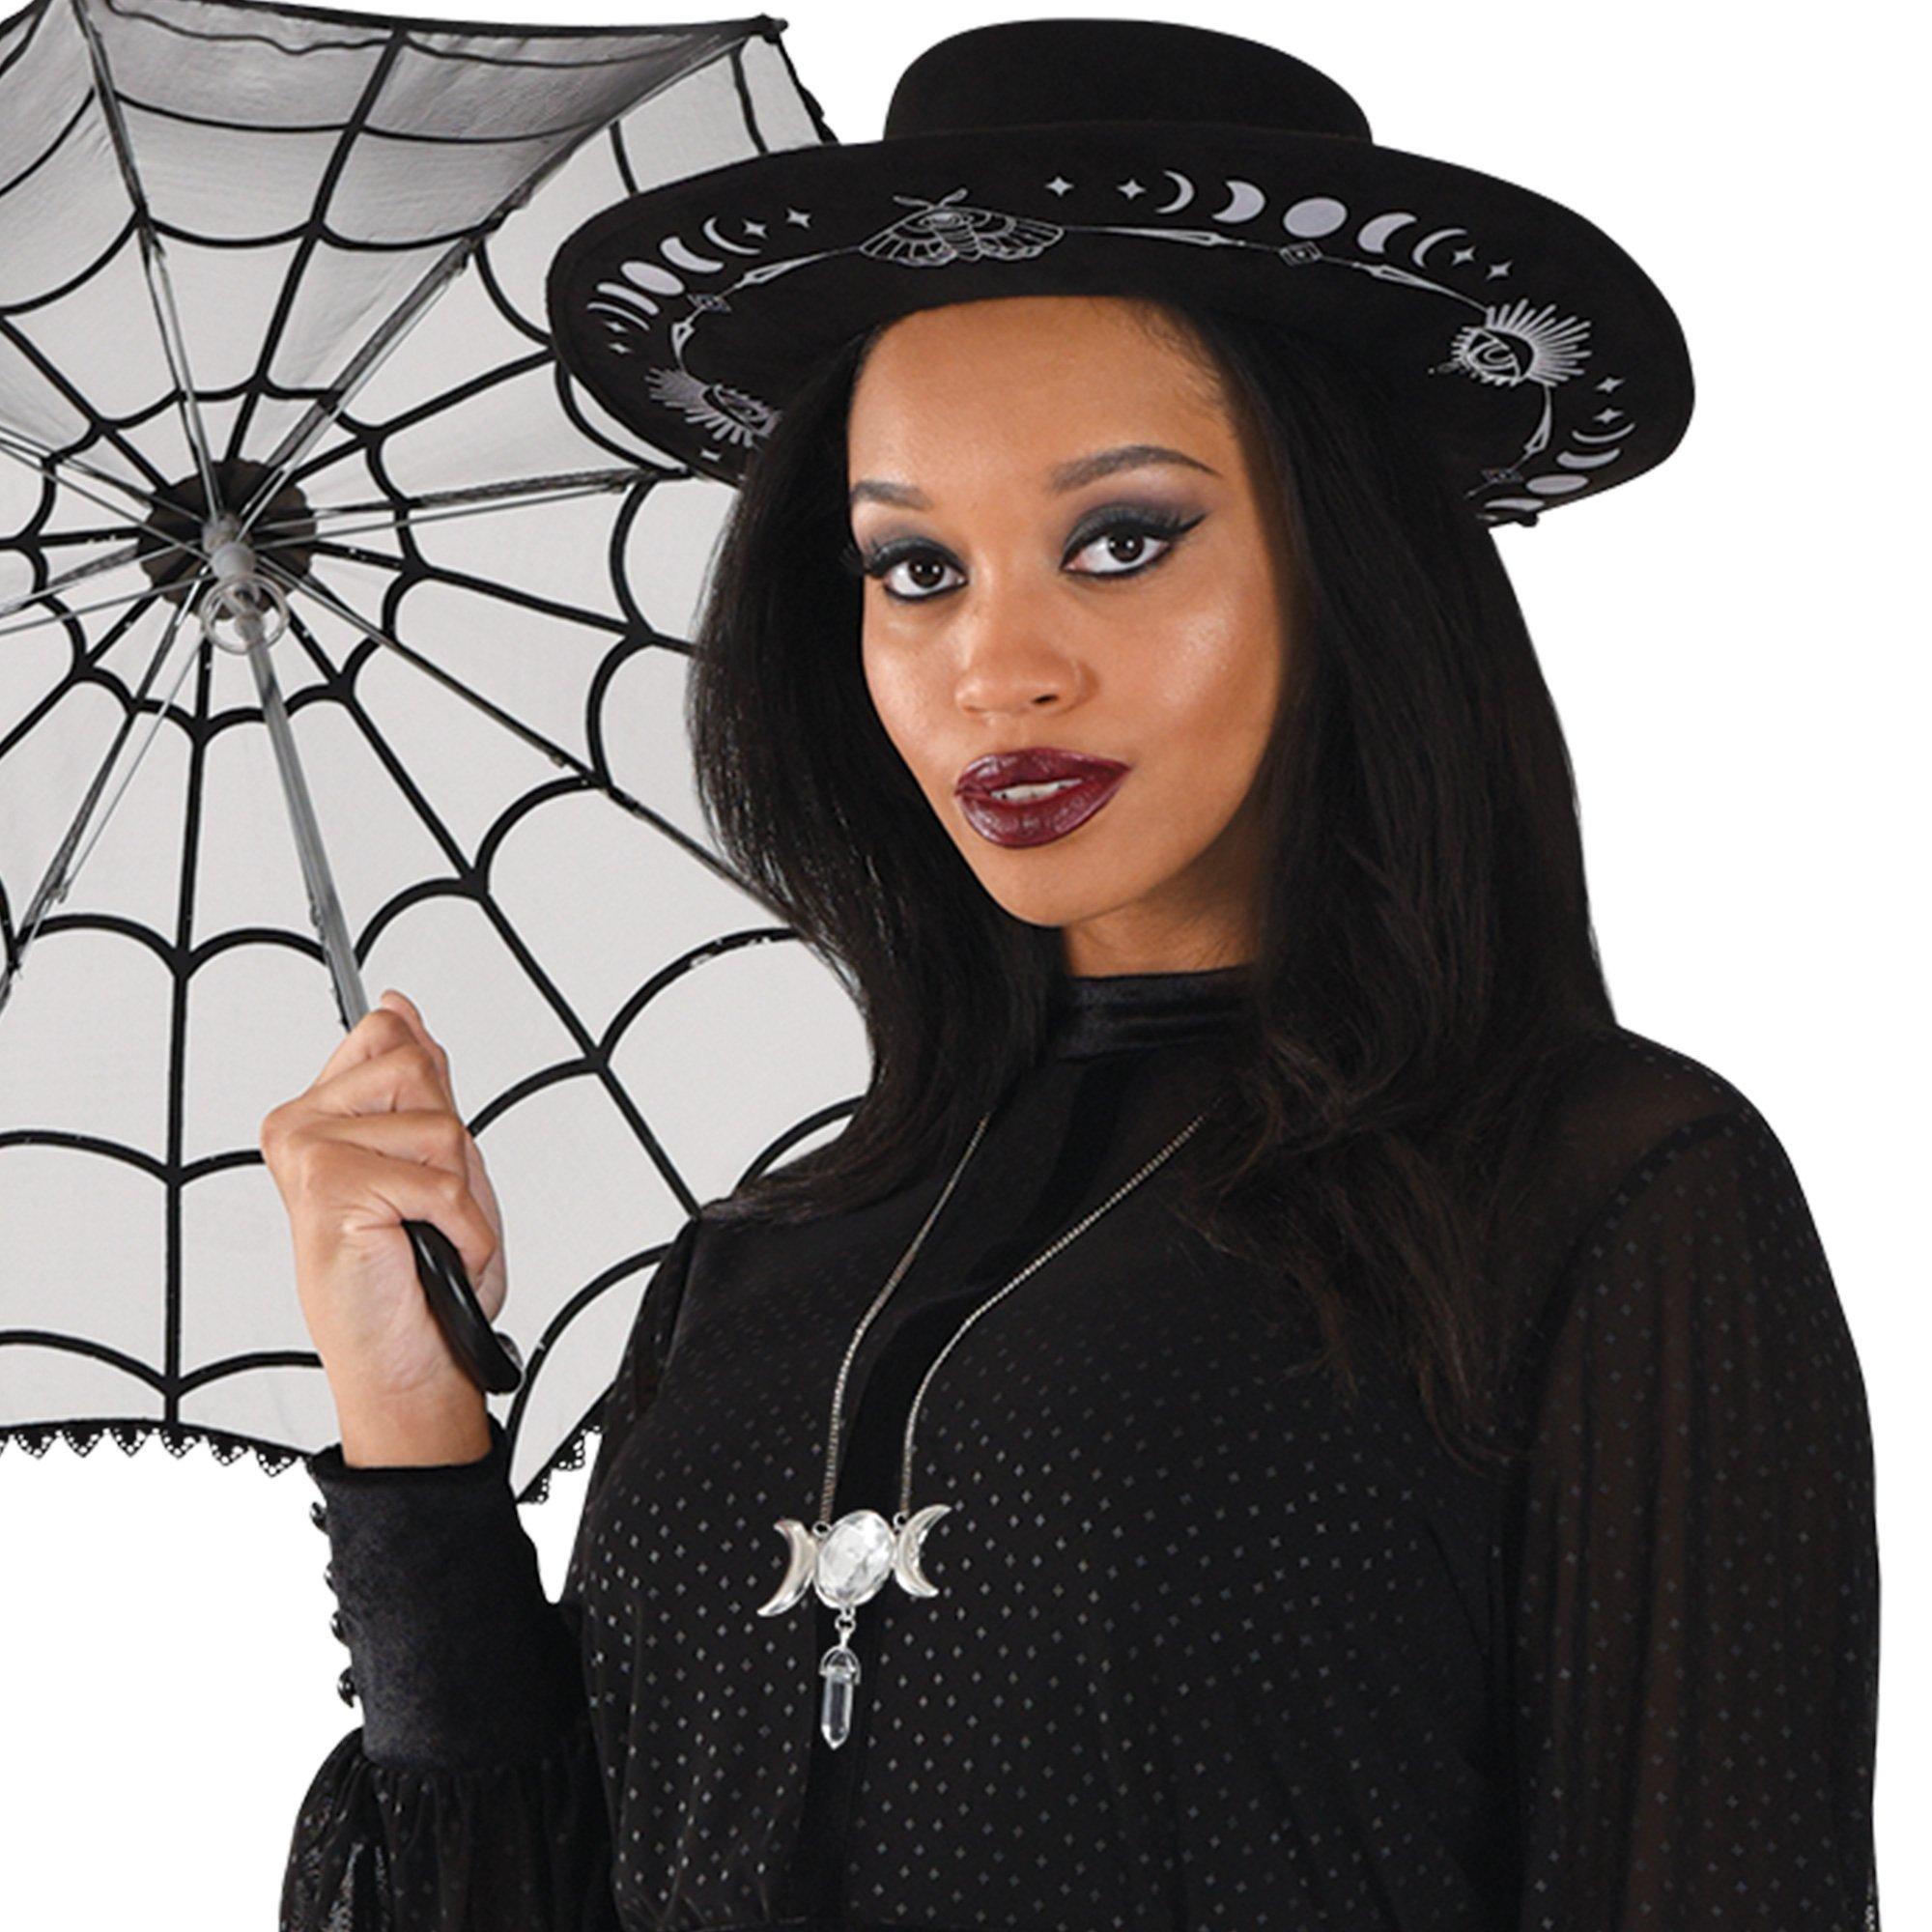 Adult Black Sheer Witch Dress